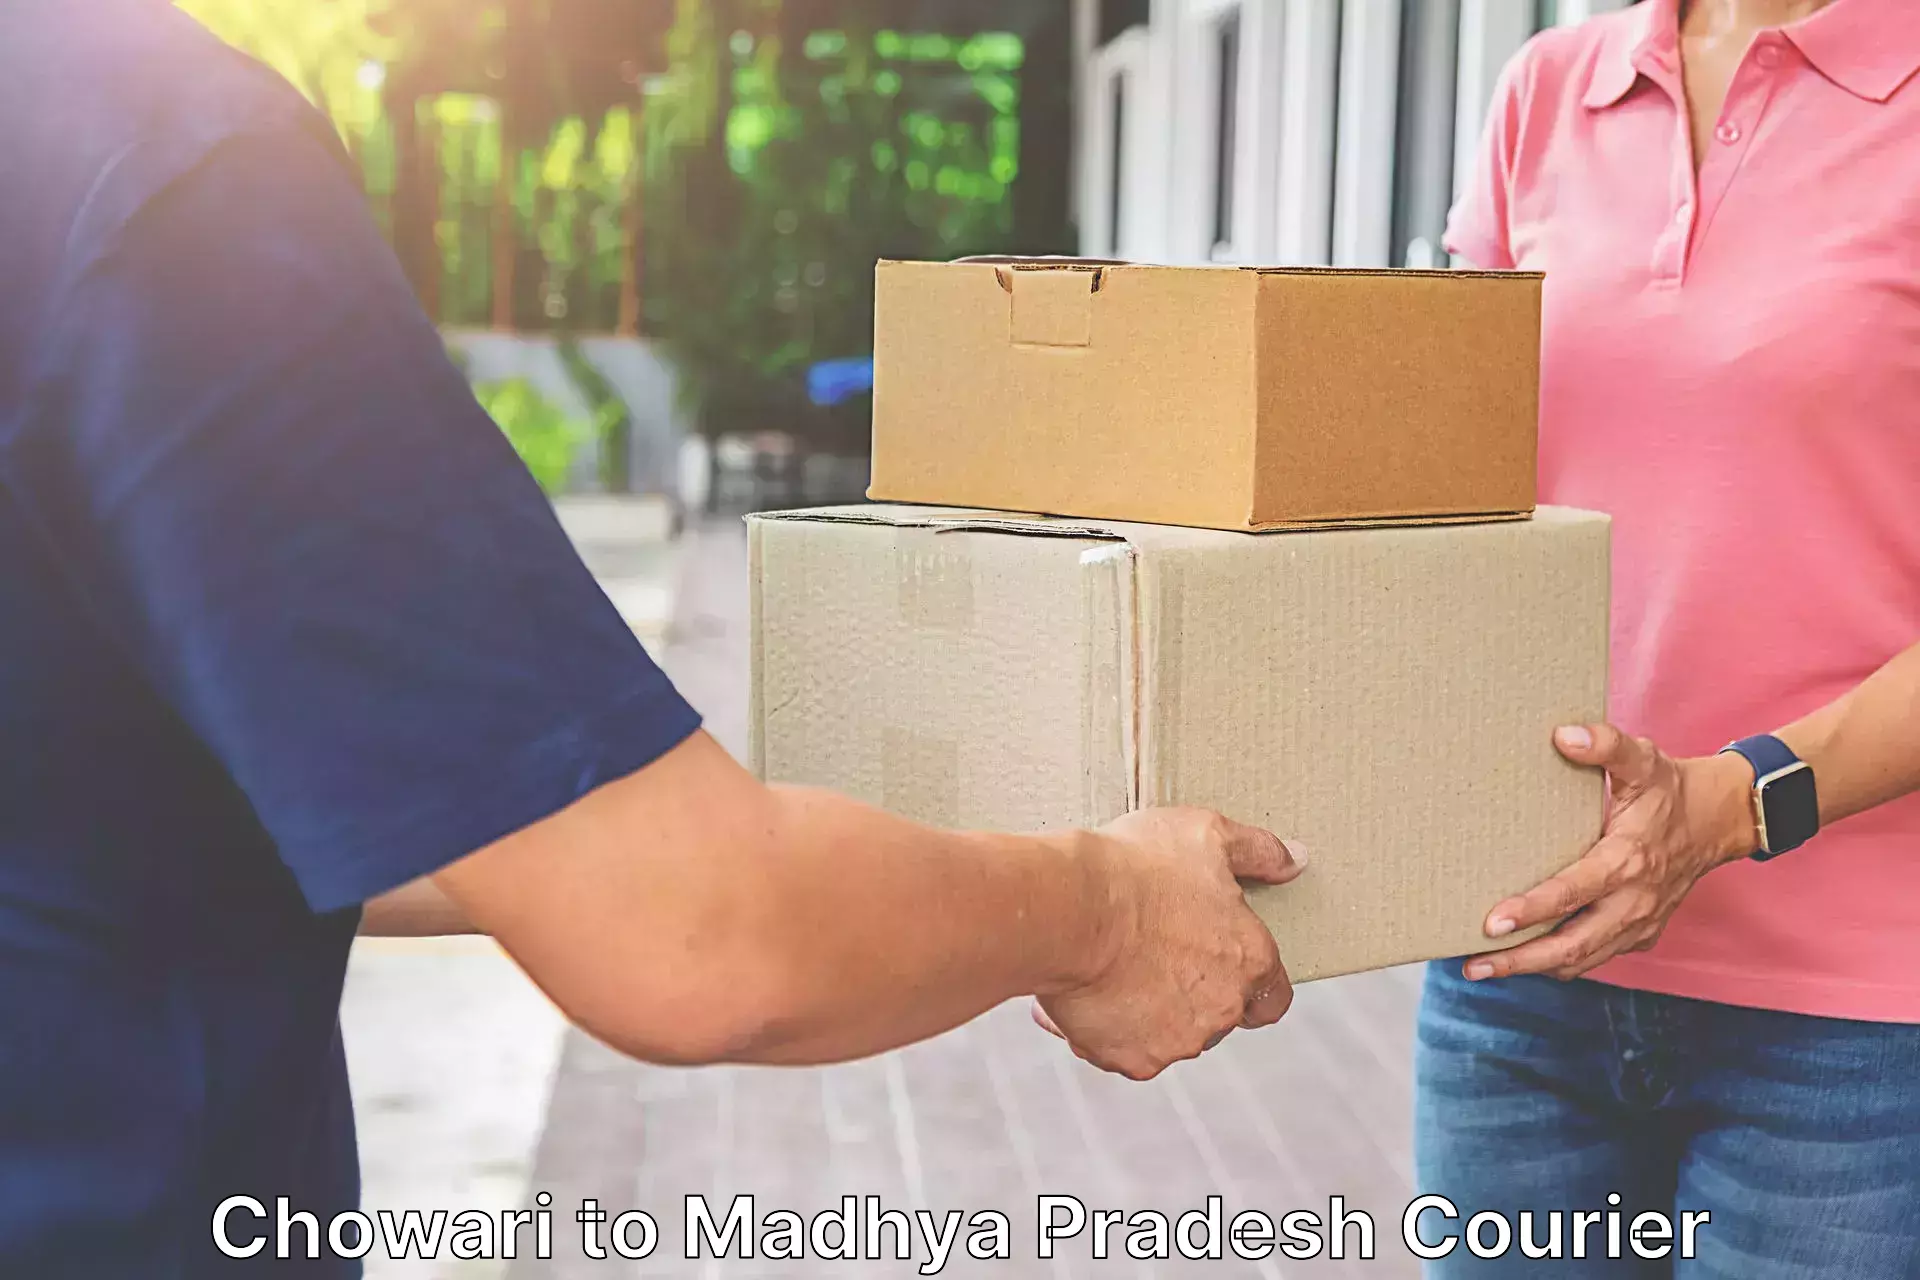 Urgent courier needs Chowari to Bhopal